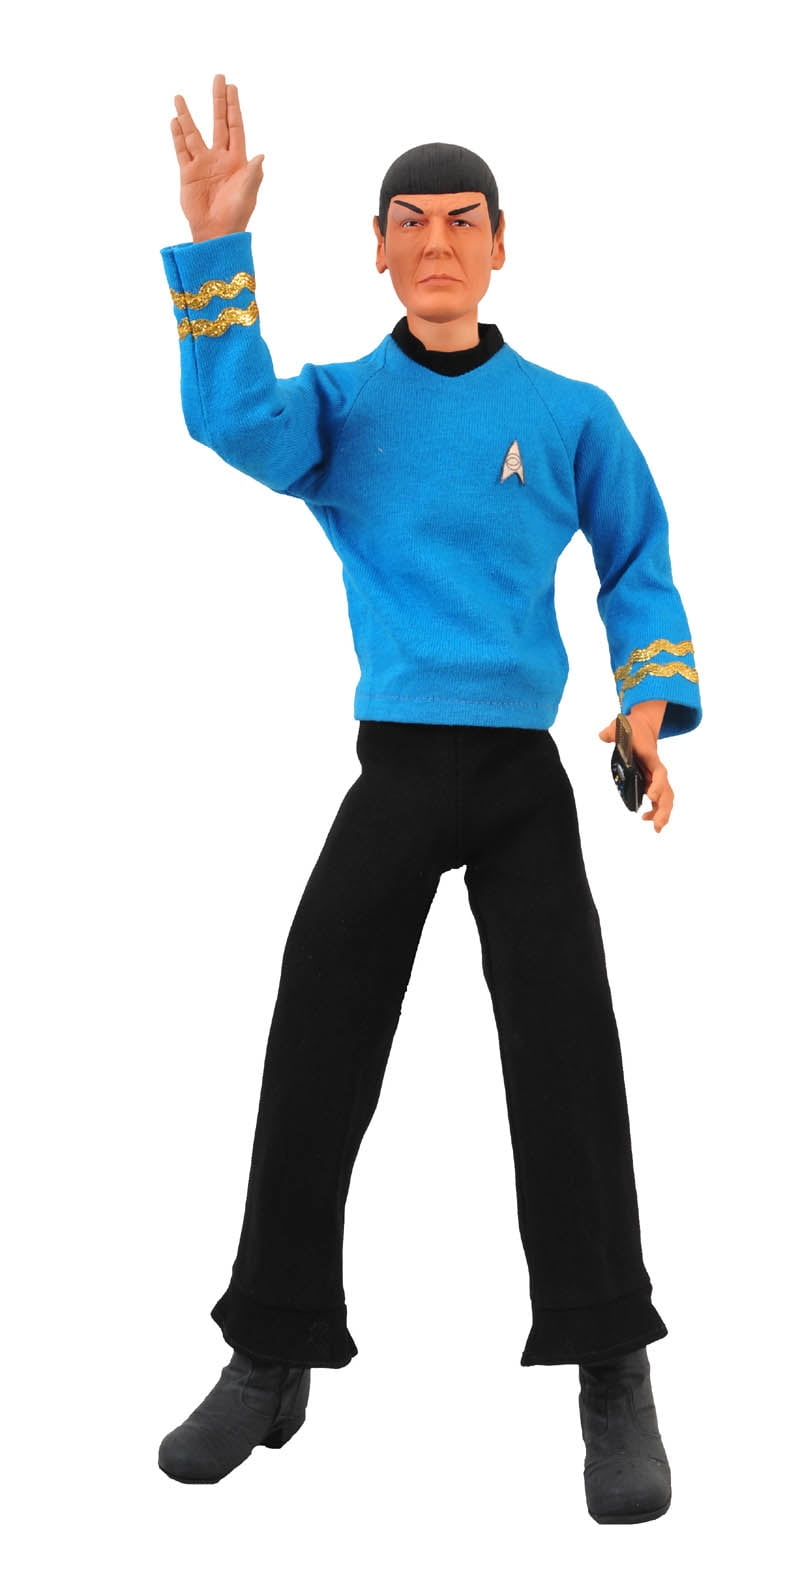 spock action figure